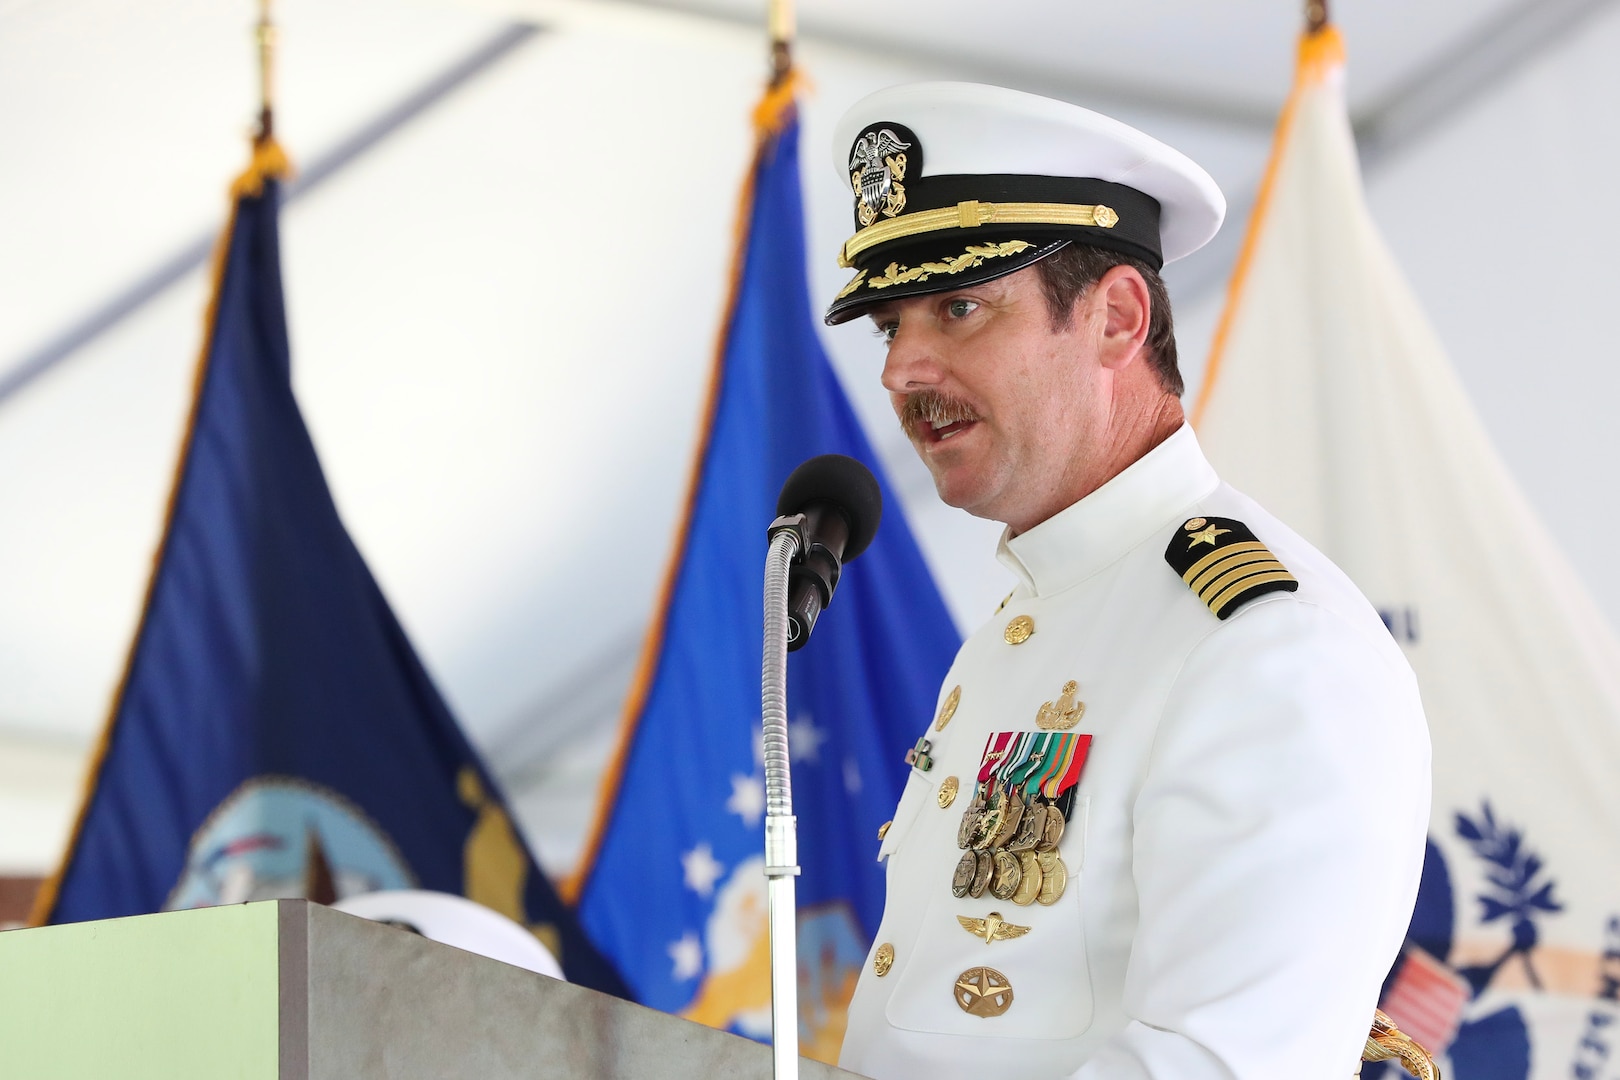 Incoming Naval Surface Warfare Center Indian Head Division Commanding Officer Capt. Stephen Duba addresses the audience at the change of command ceremony at Naval Support Facility Indian Head, Md., Aug. 25. Duba will now oversee the DoD’s largest full-spectrum energetics facility and the Navy’s only public arsenal supporting the DoD, the nation’s partners and allies.